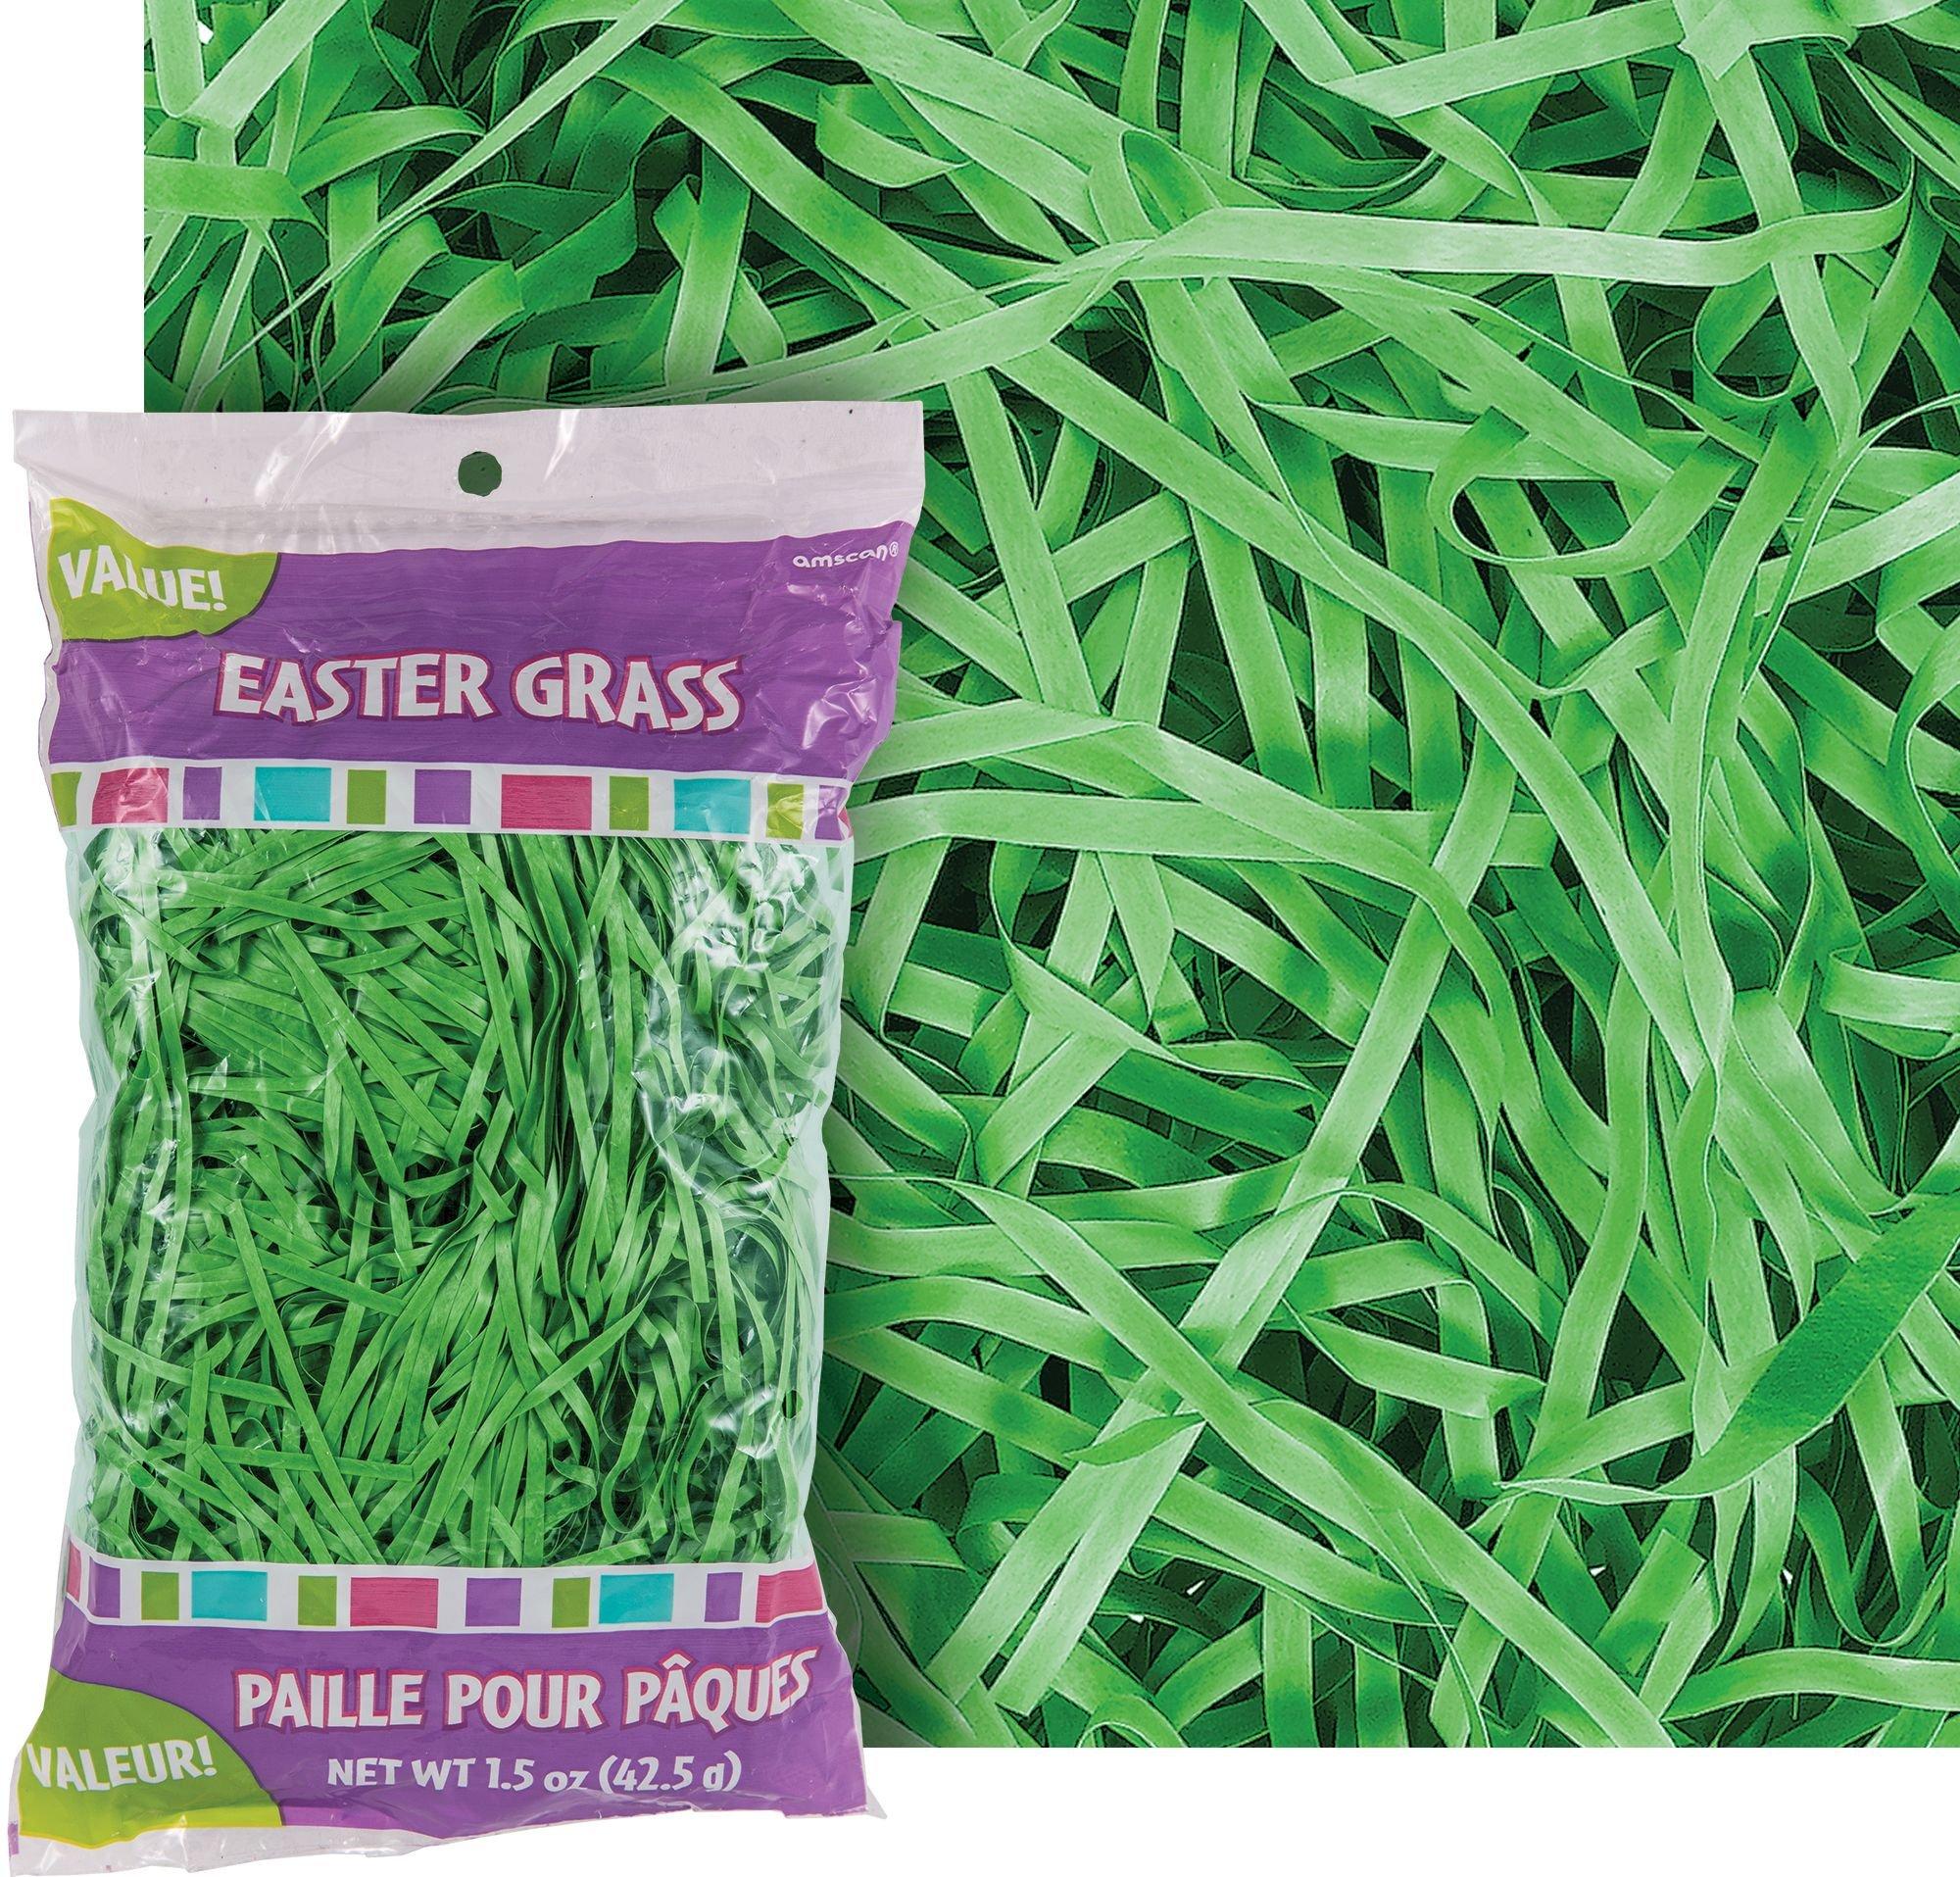 No Mess Easter Grass - Aunt Peaches